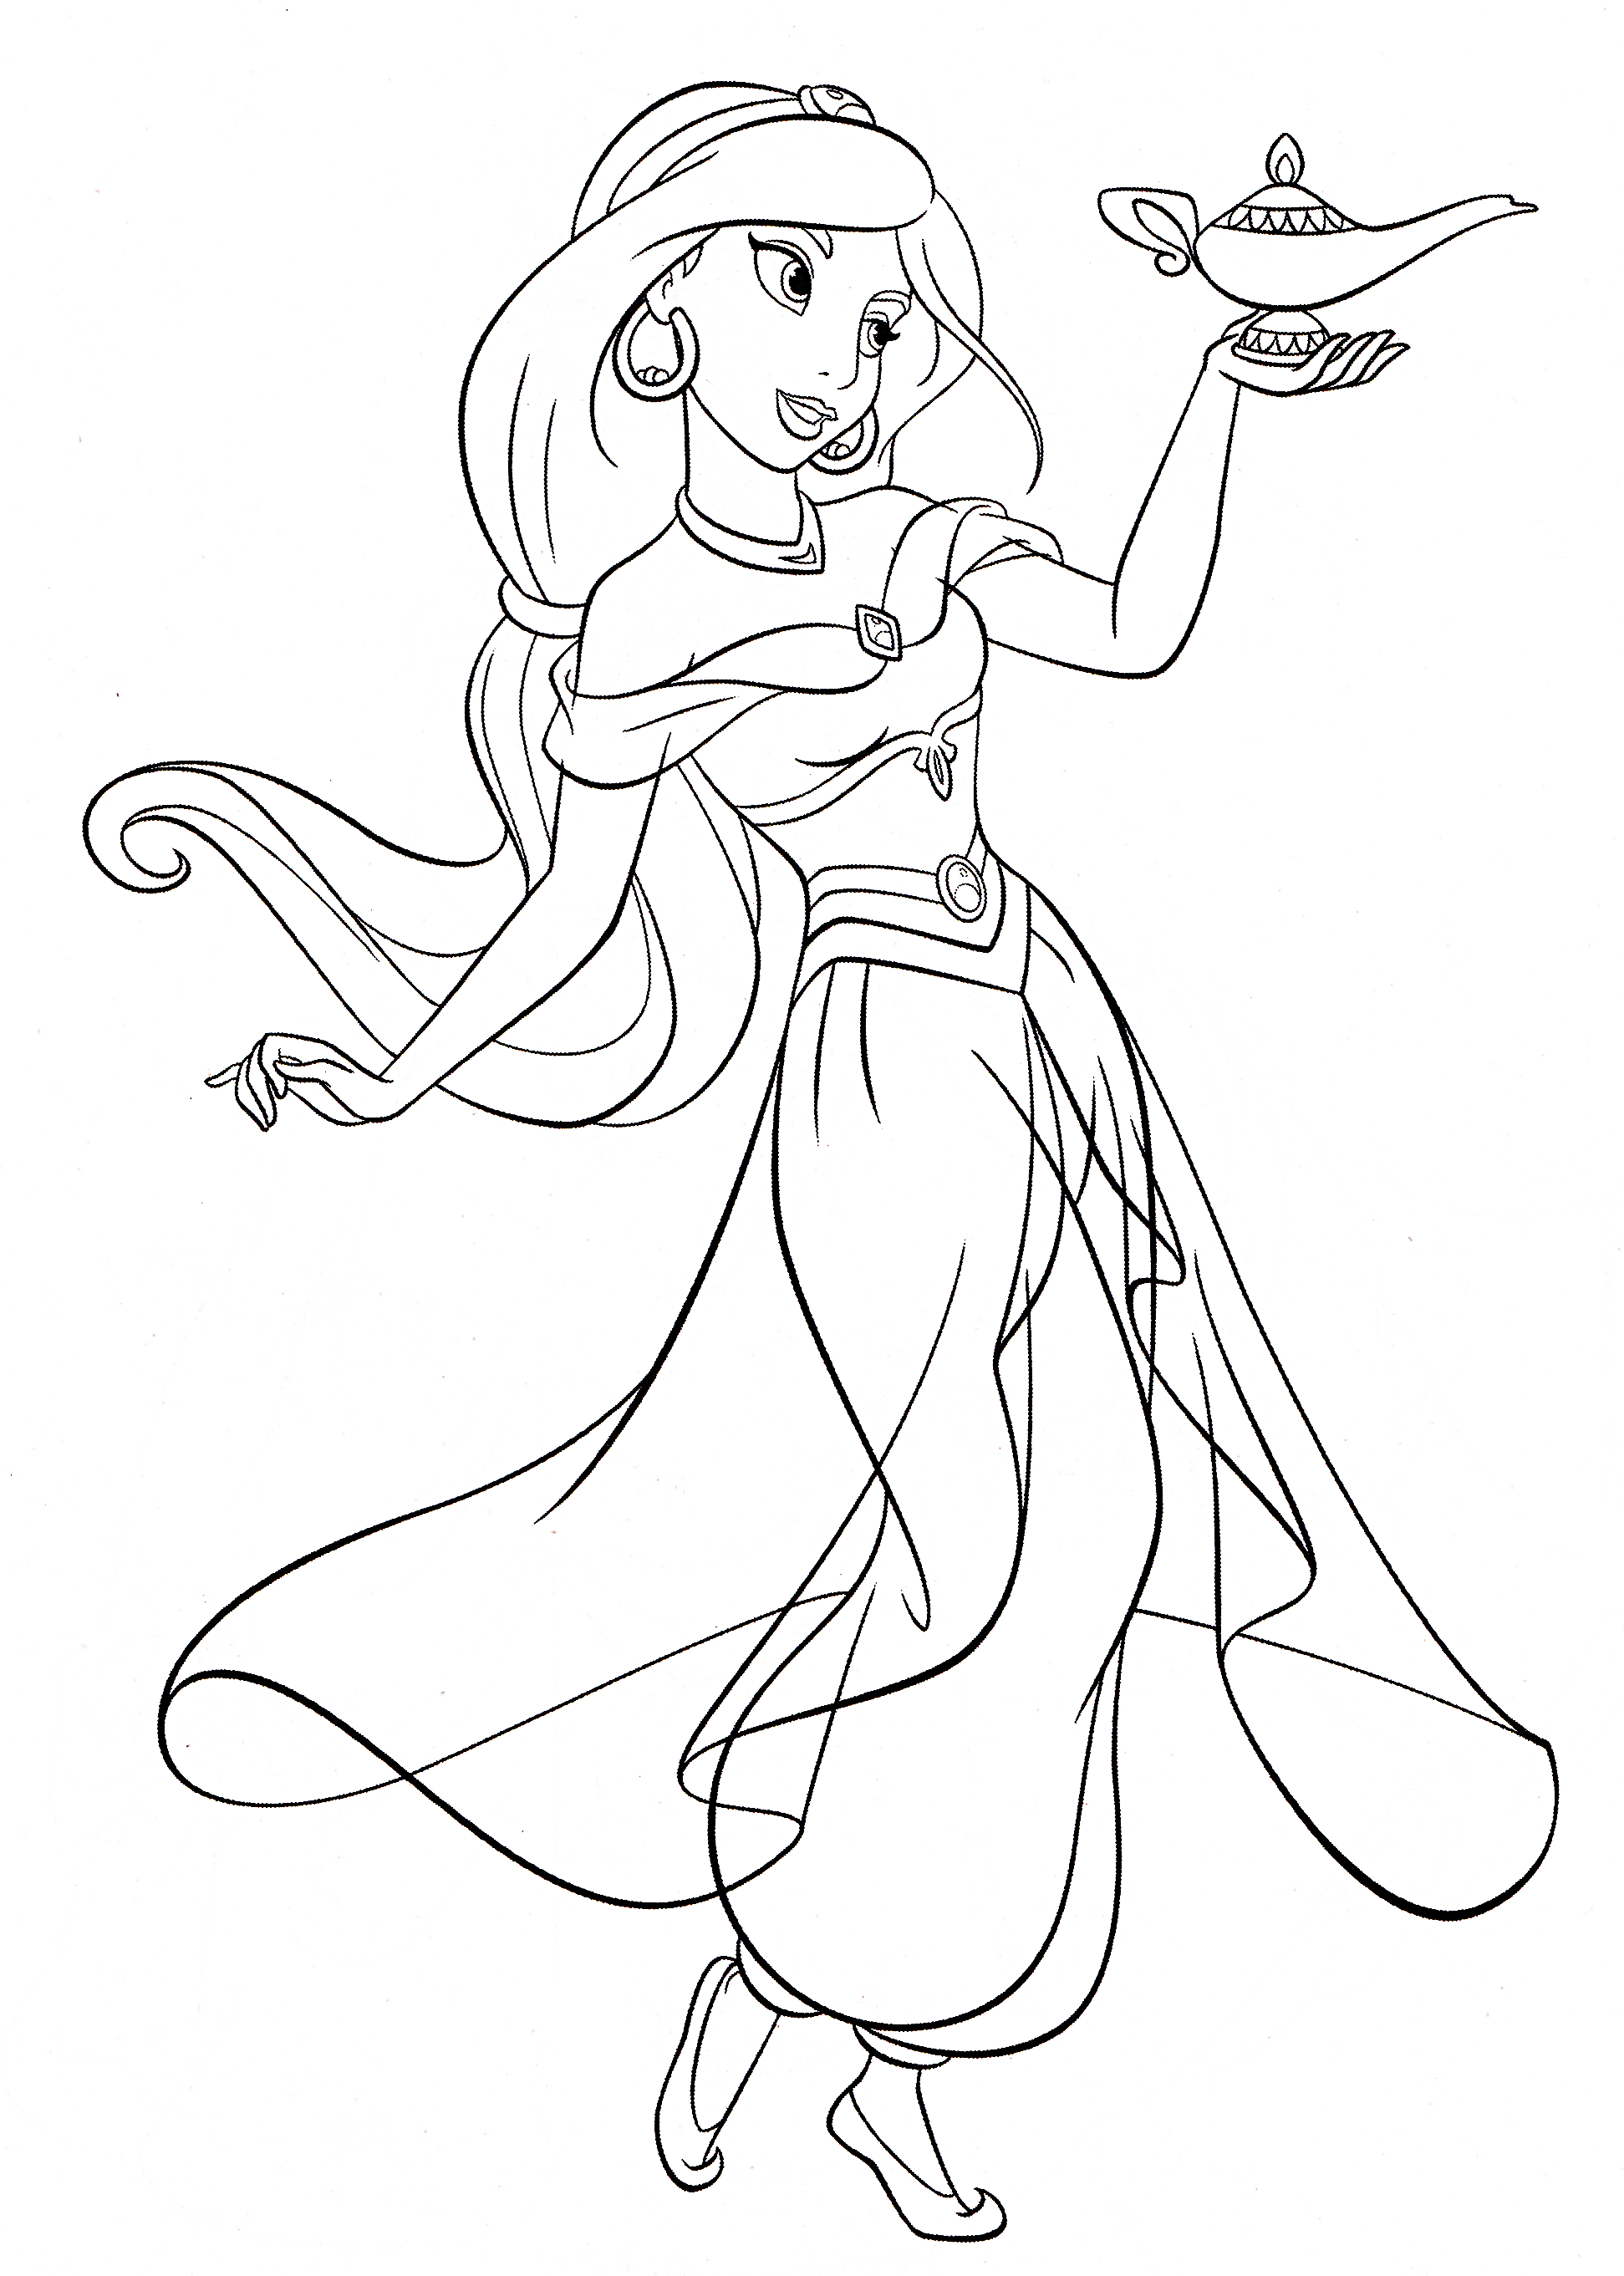 Jasmine Coloring Pages To Print Archives - Free Coloring Pages For - Free Printable Princess Jasmine Coloring Pages